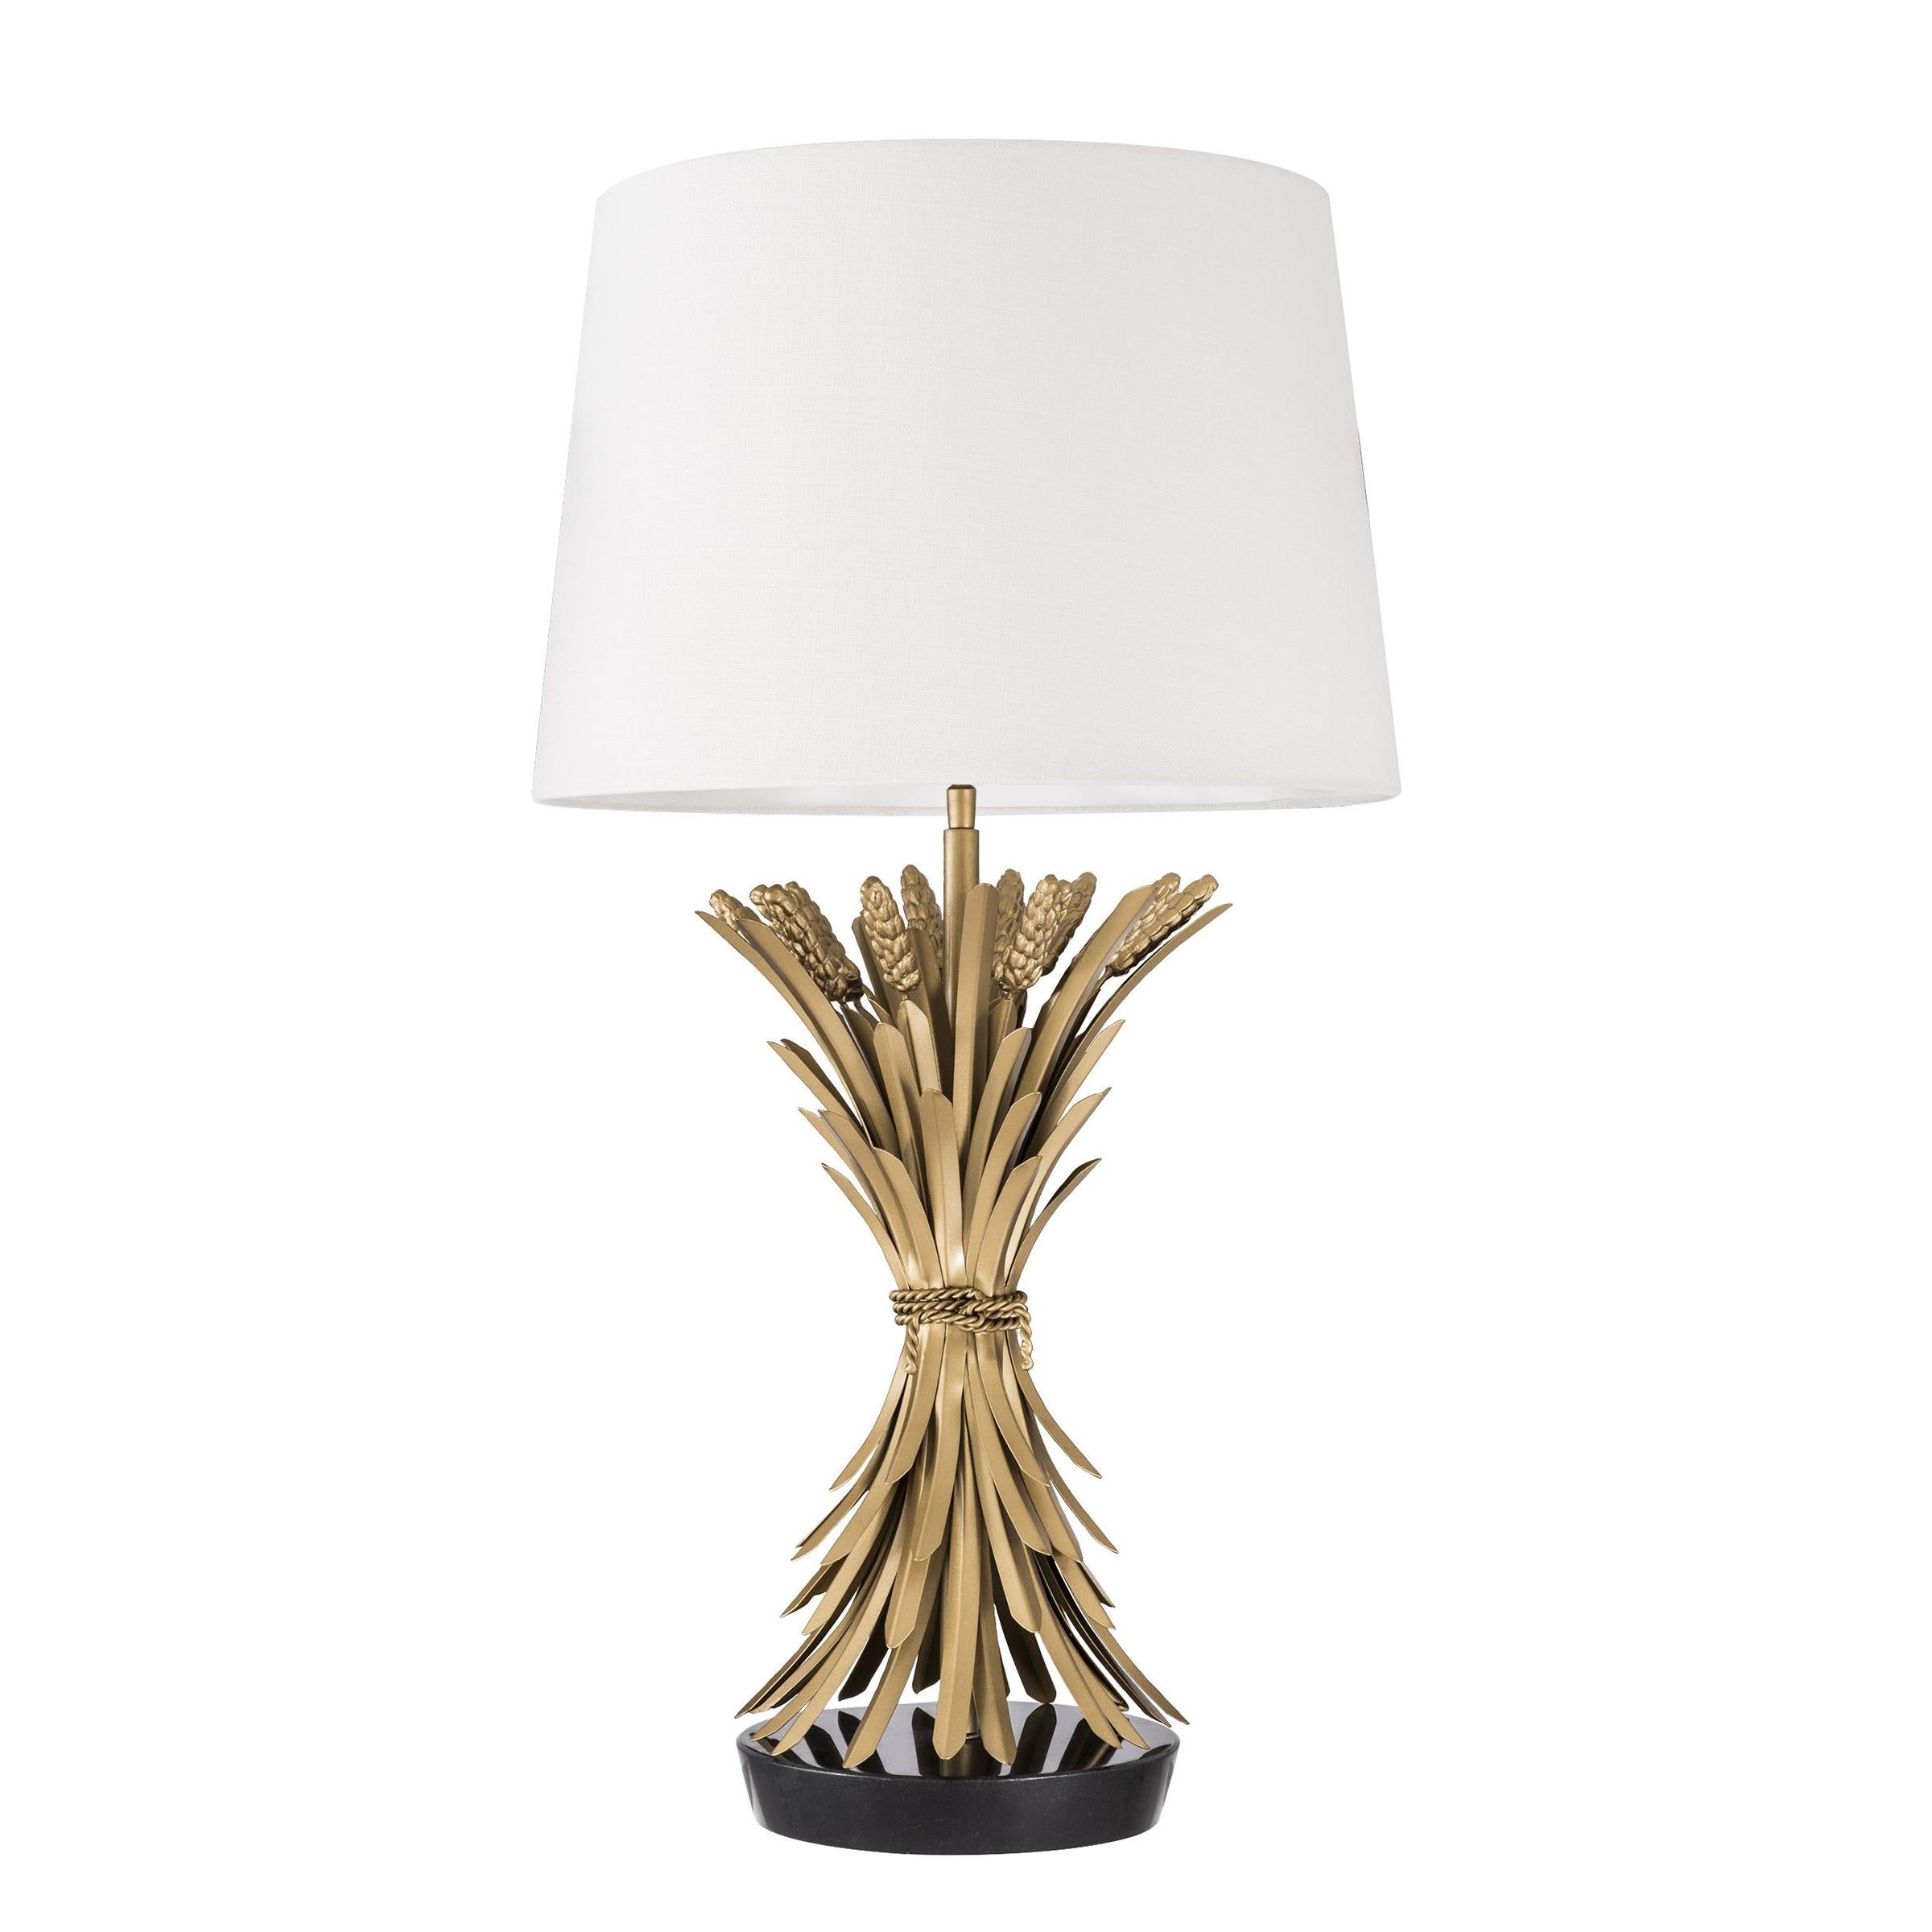 Table lamp wheat sheaf with structure in
iron in antique gold finish. With black granite
base. With 1 bulb, lamp holder type E27, max
40 watts. Bulb not included. With white shade
included.